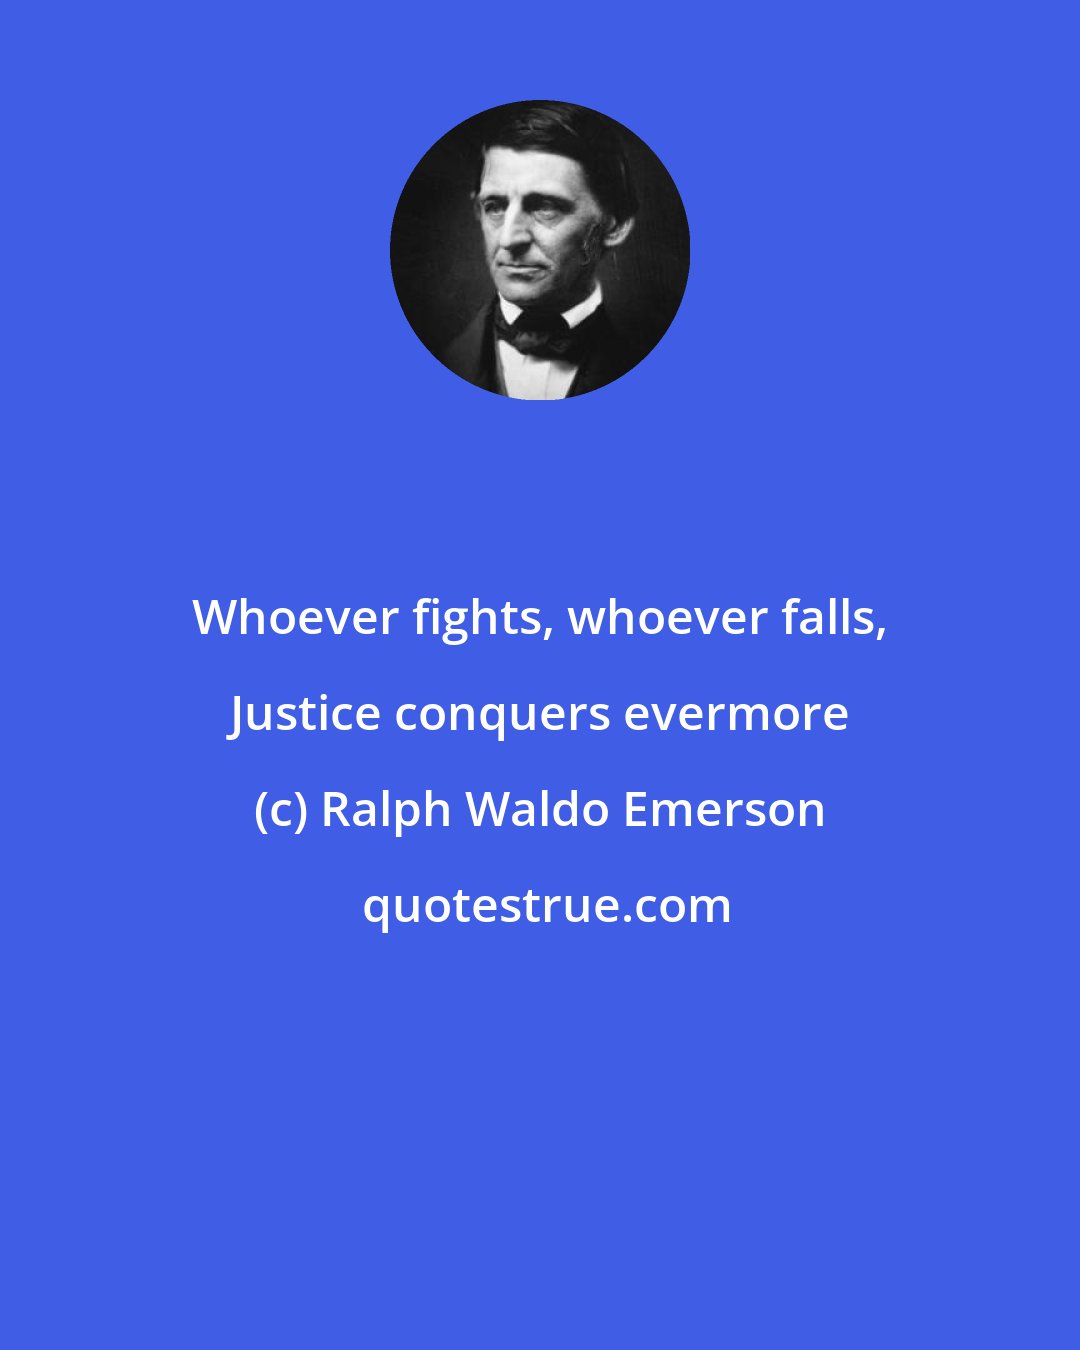 Ralph Waldo Emerson: Whoever fights, whoever falls, Justice conquers evermore